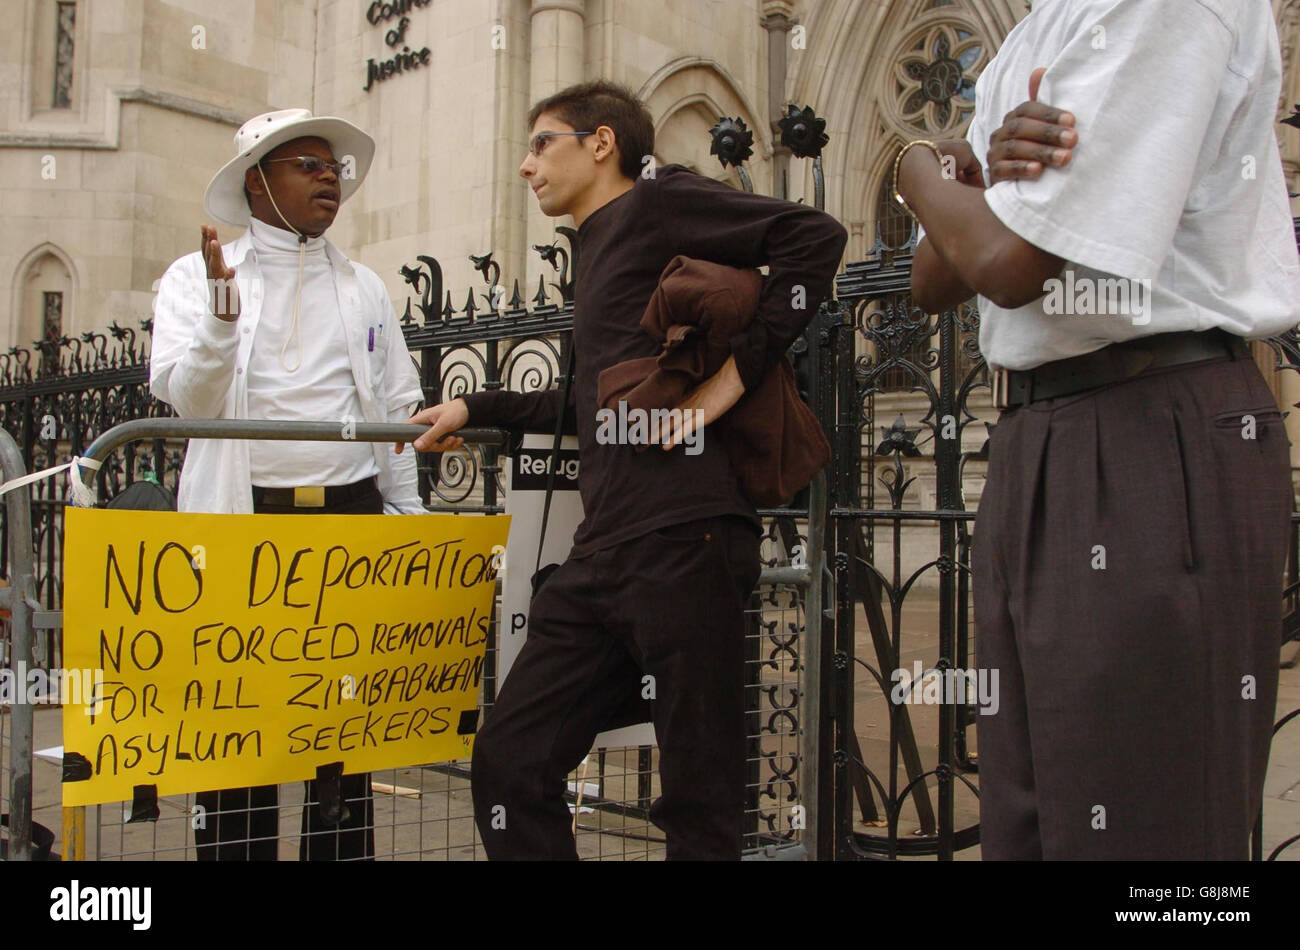 Noble Sibanda (left) takes part in a 'solidarity vigil' organised by the United Network of Detained Zimbabweans (UNDZ) outside the Royal Courts of Justice. The Refugee Council is supporting the vigil as campaigners fight for the permanent prevention of Zimbabwean asylum seekers from being forced to return back to their country under Robert Mugabe's regieme. Stock Photo